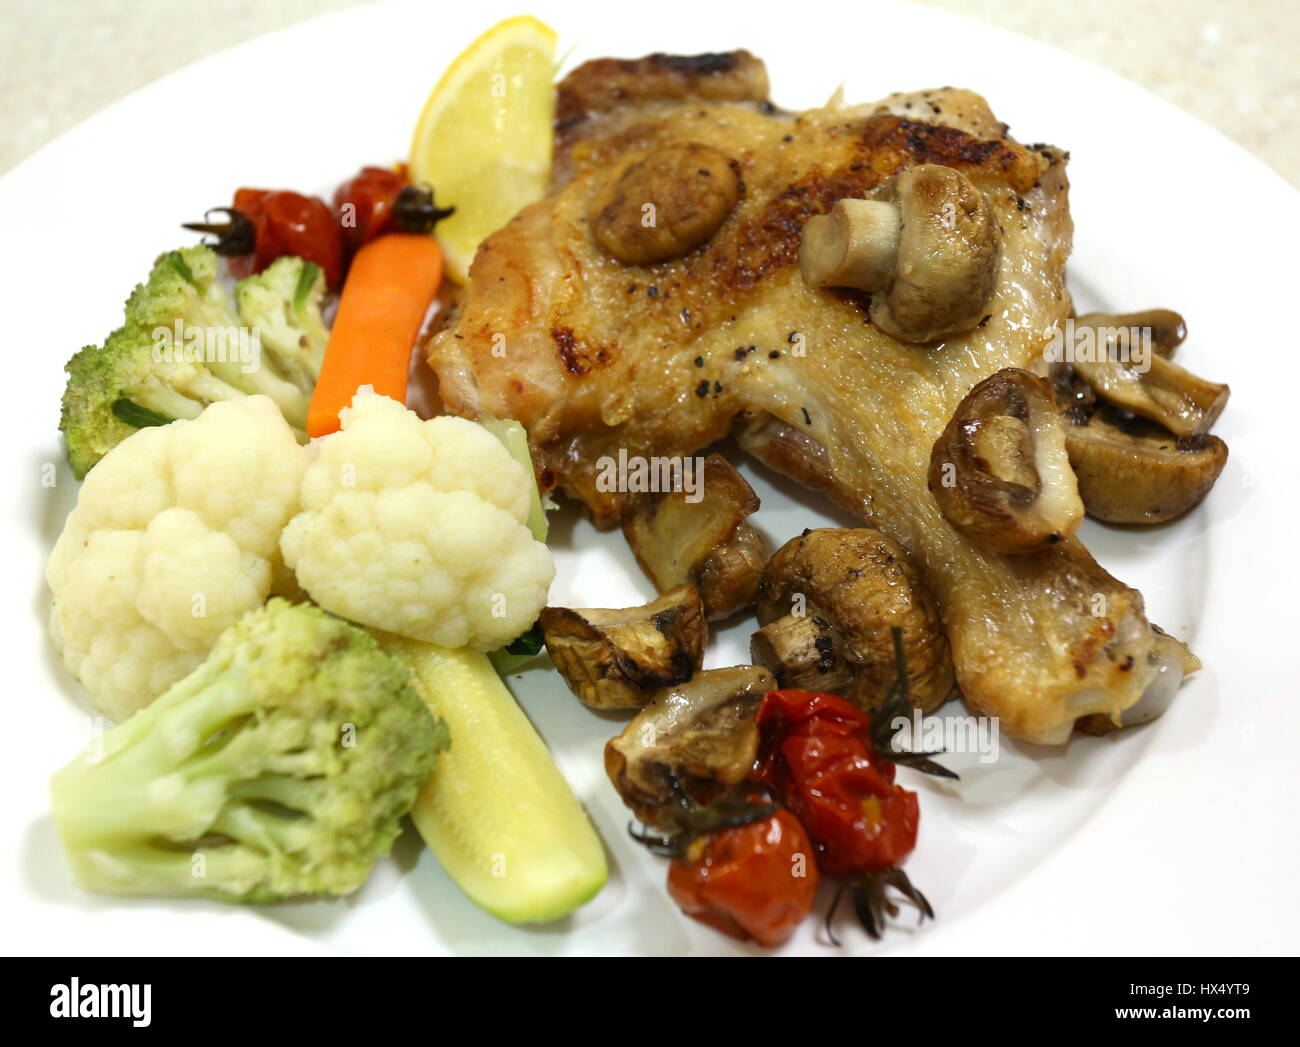 Oven grilled chicken leg and mushrooms, served with steamed cauliflower, courgette,carrot, cherry tomatoes and romanesco broccoli. Stock Photo